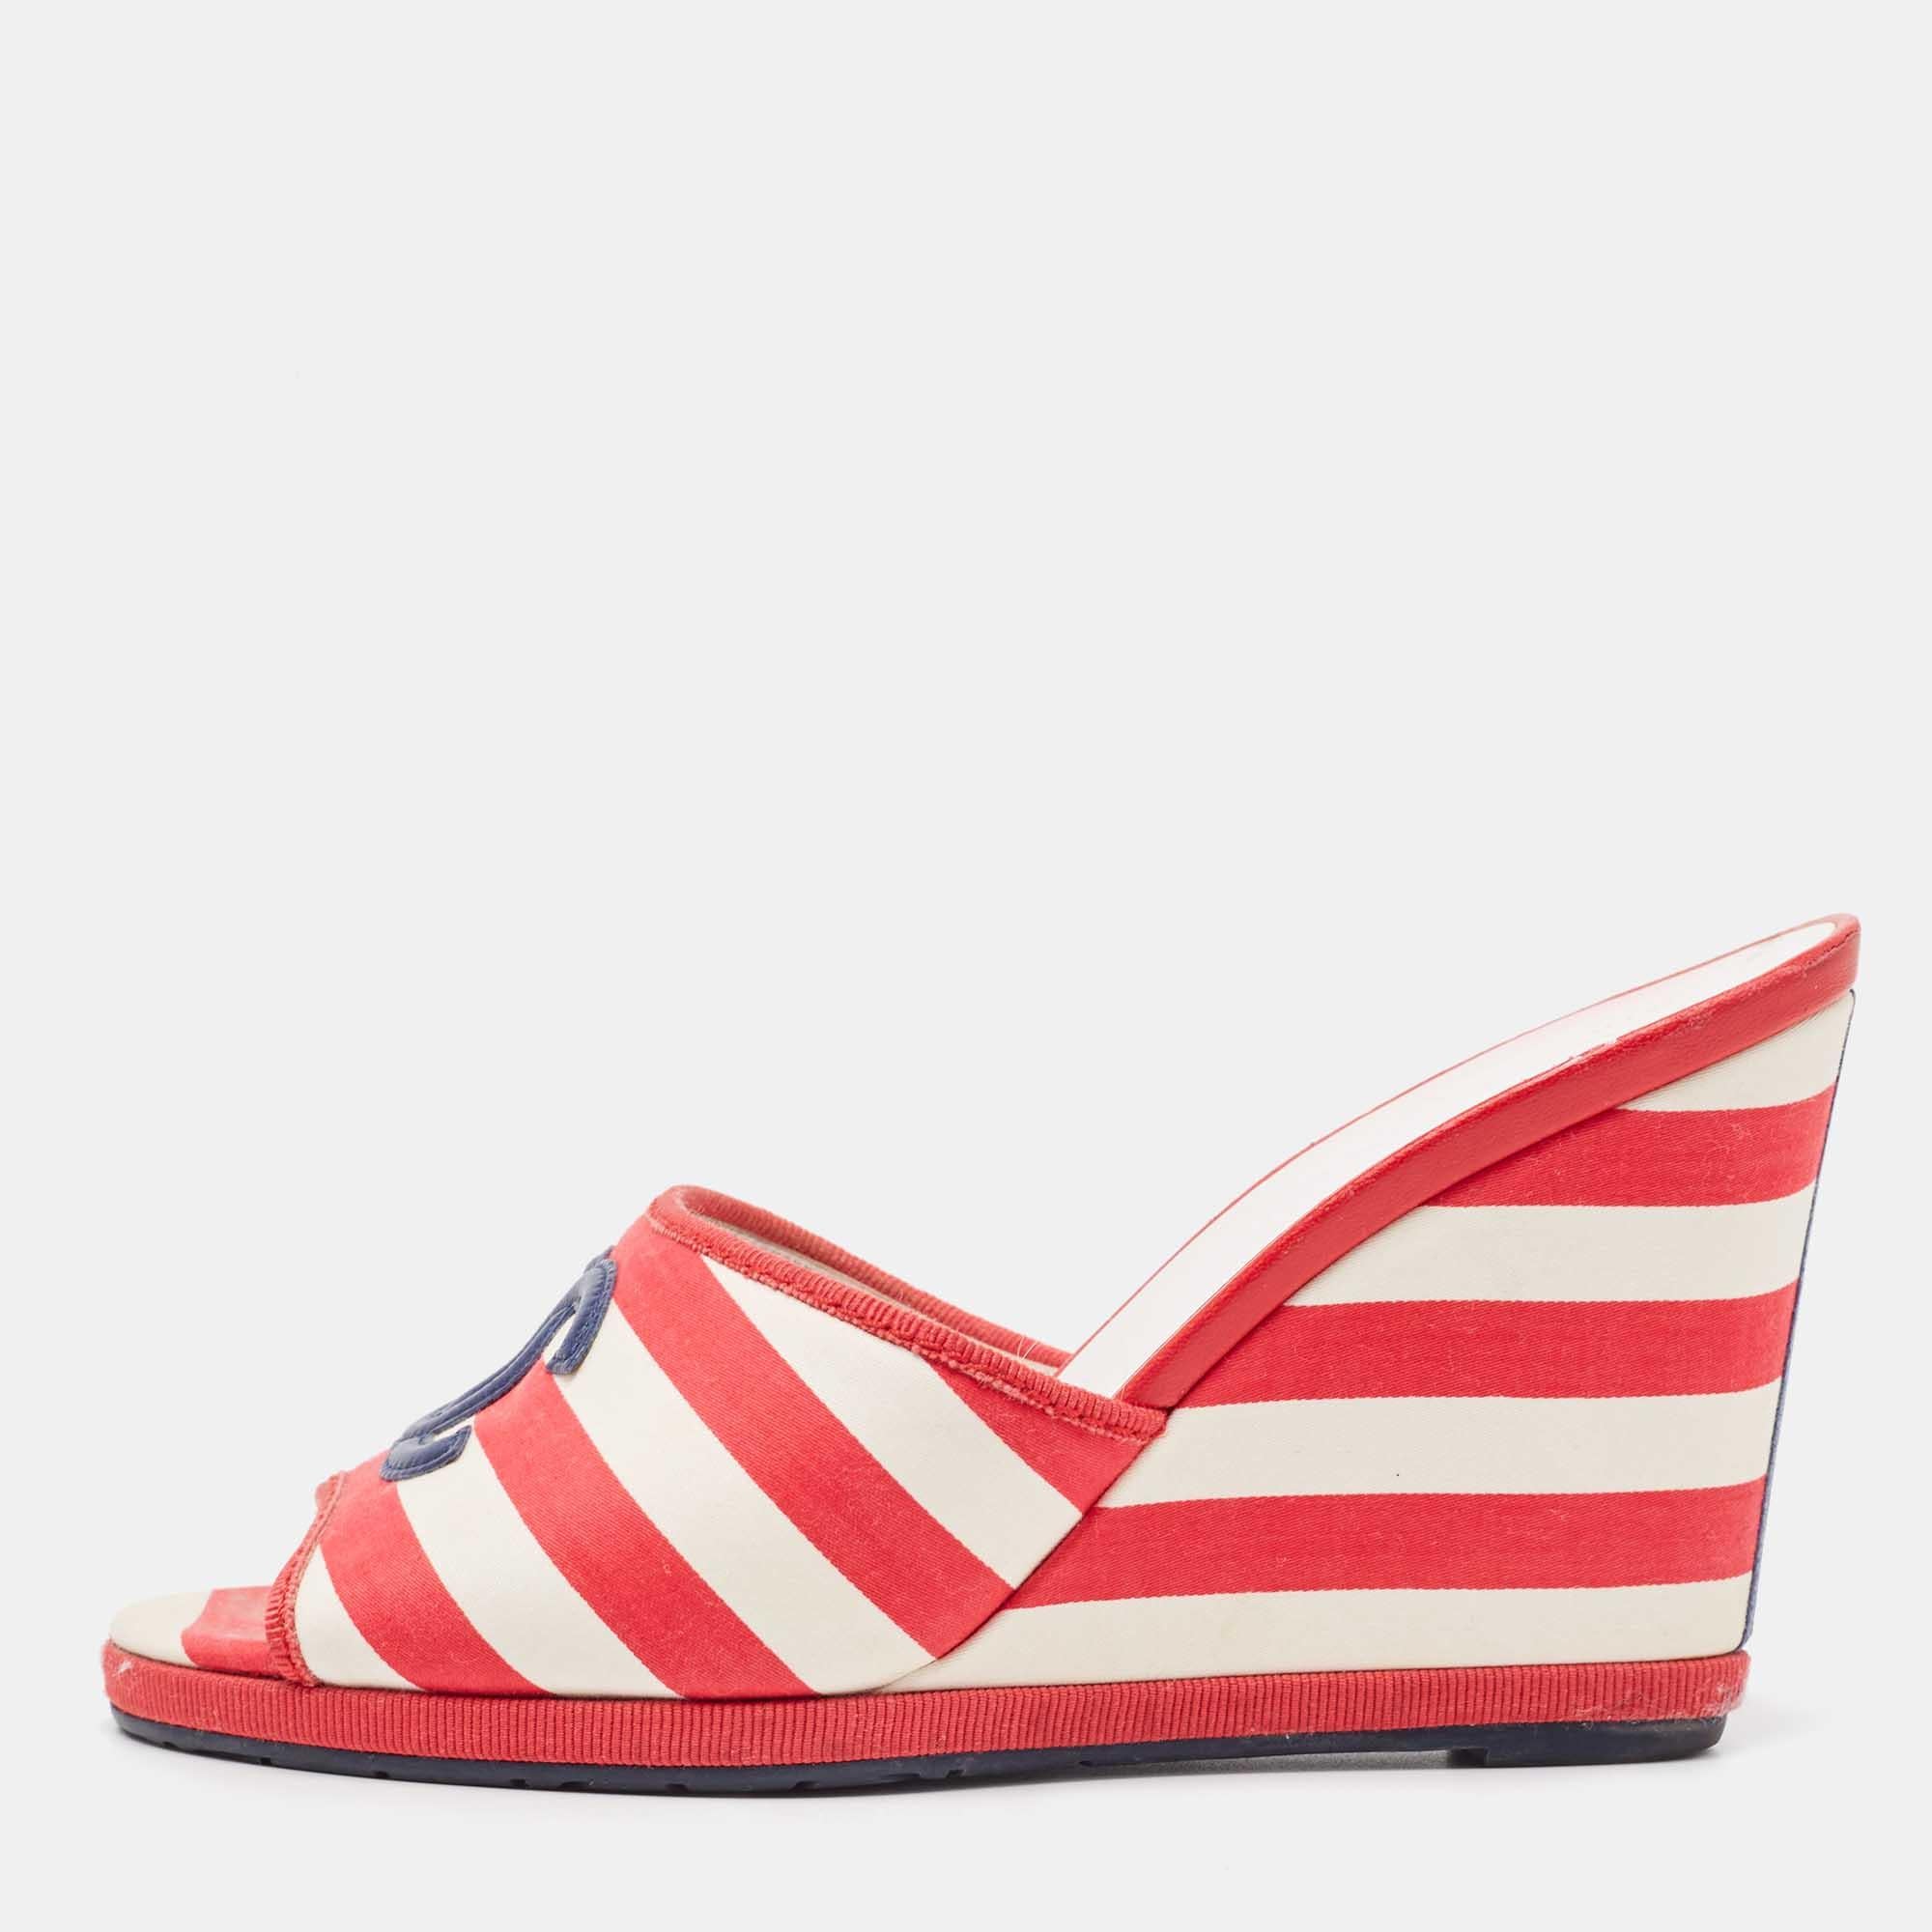 Chanel Red/White Canvas CC Stripe Wedge Sandals Size 37 3